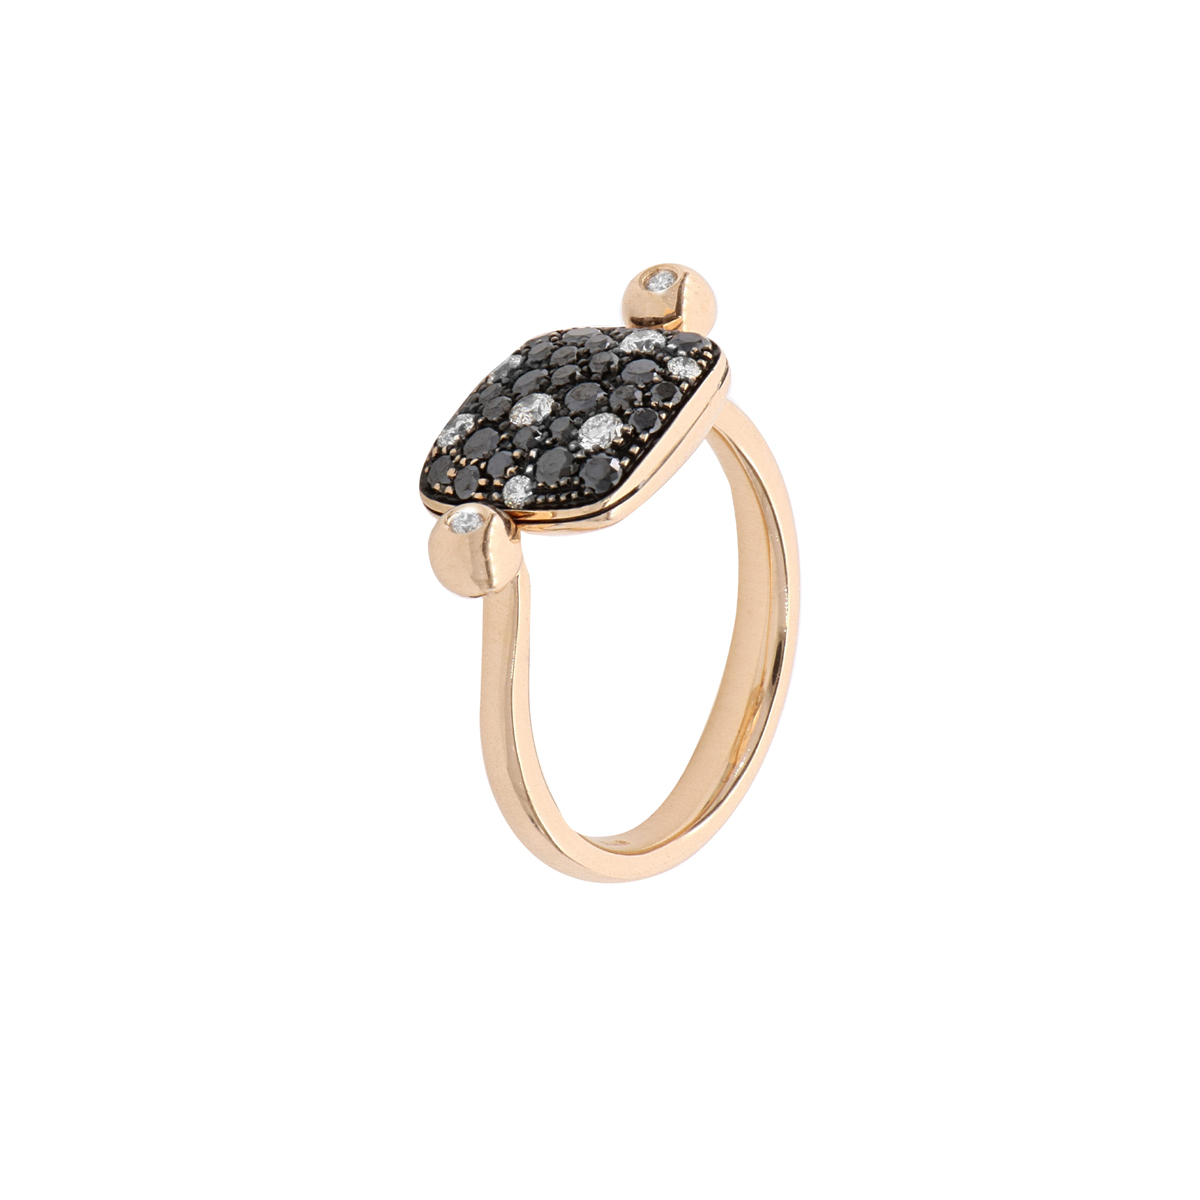 Reversible Black and White Diamond Square Ring in 18 Kt Rose Gold